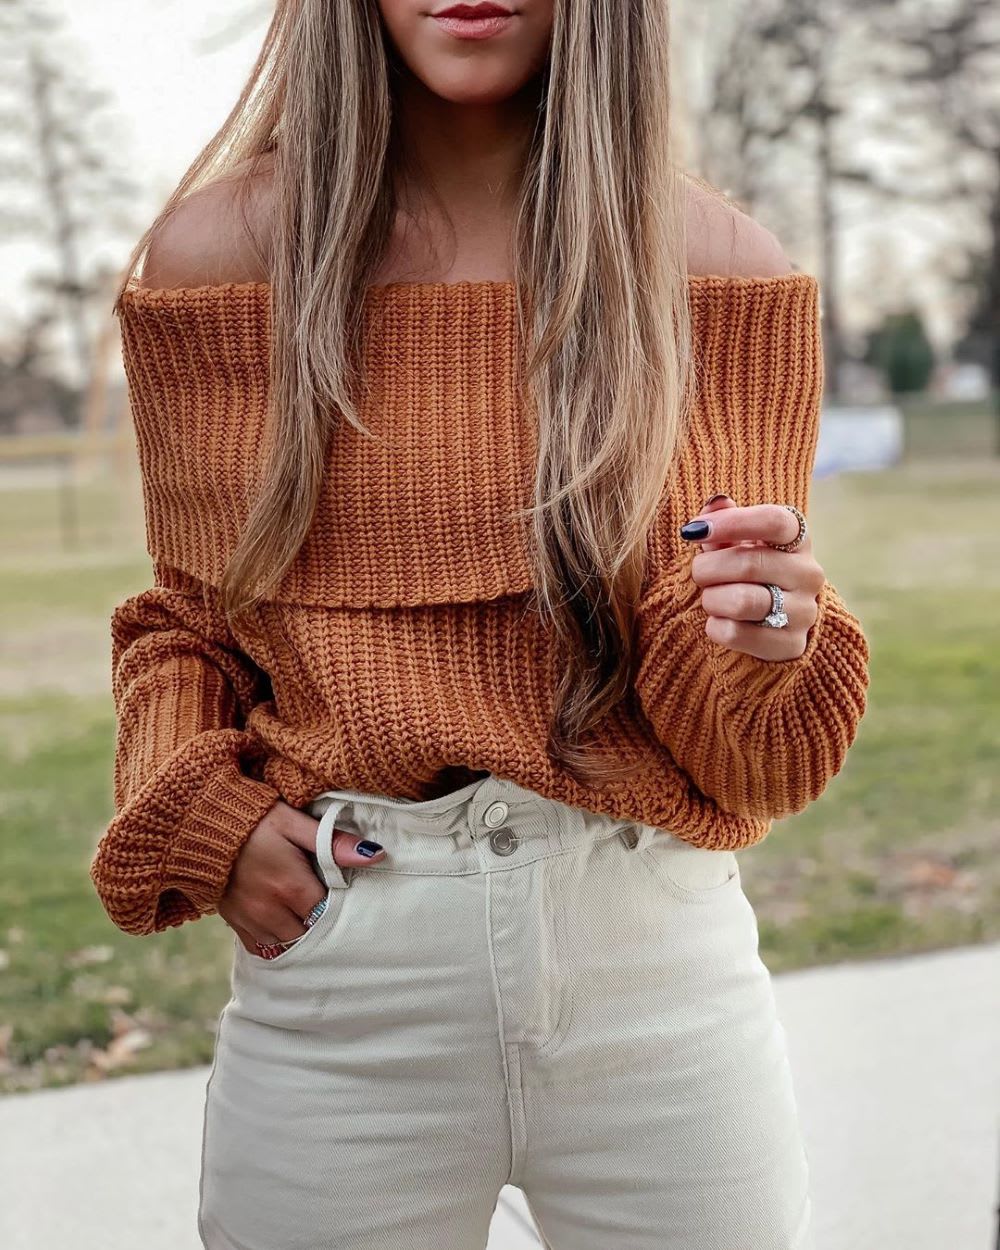 13 Sweater Outfits to Copy This Cozy Season - Lulus.com Fashion Blog